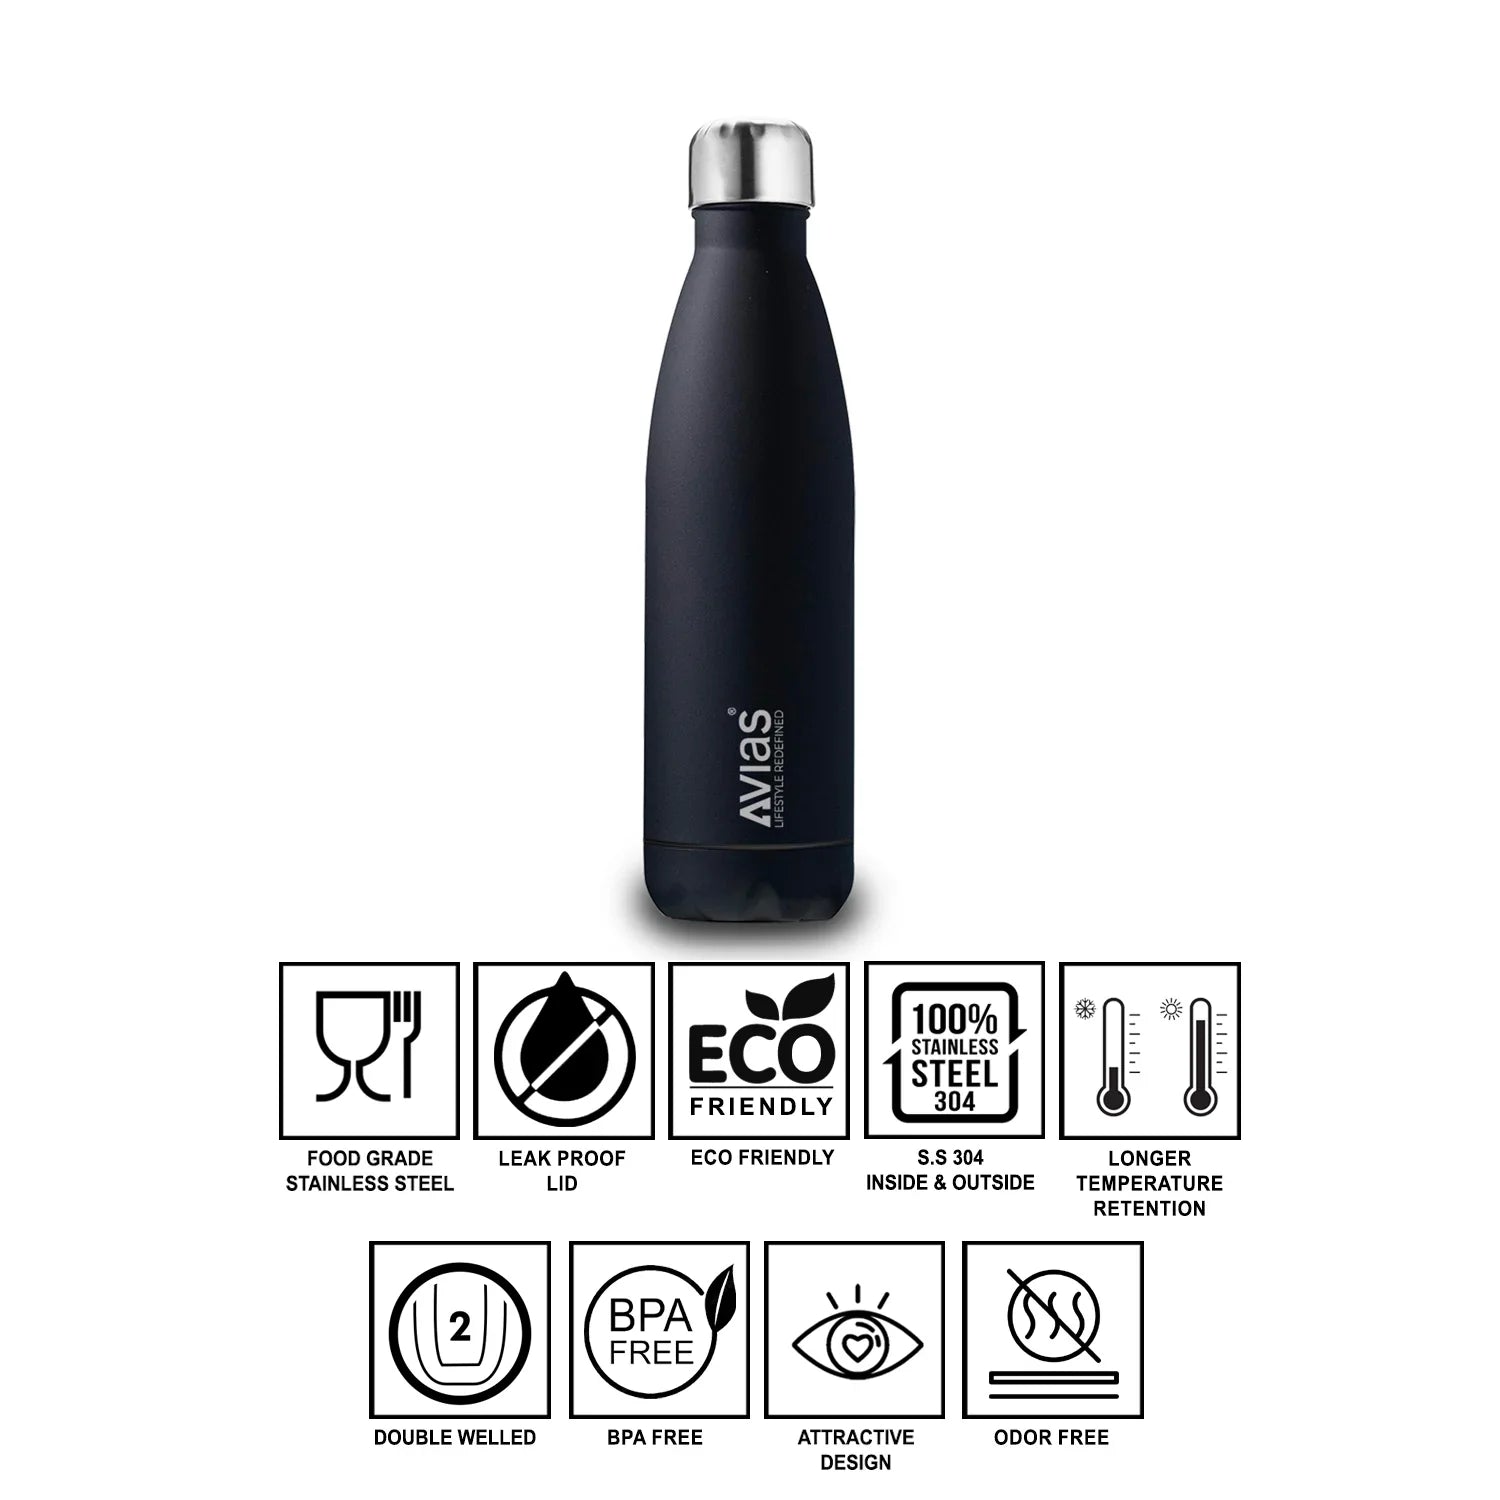 Evita premium stainless steel Vacuum Insulated Flask Water Bottle features